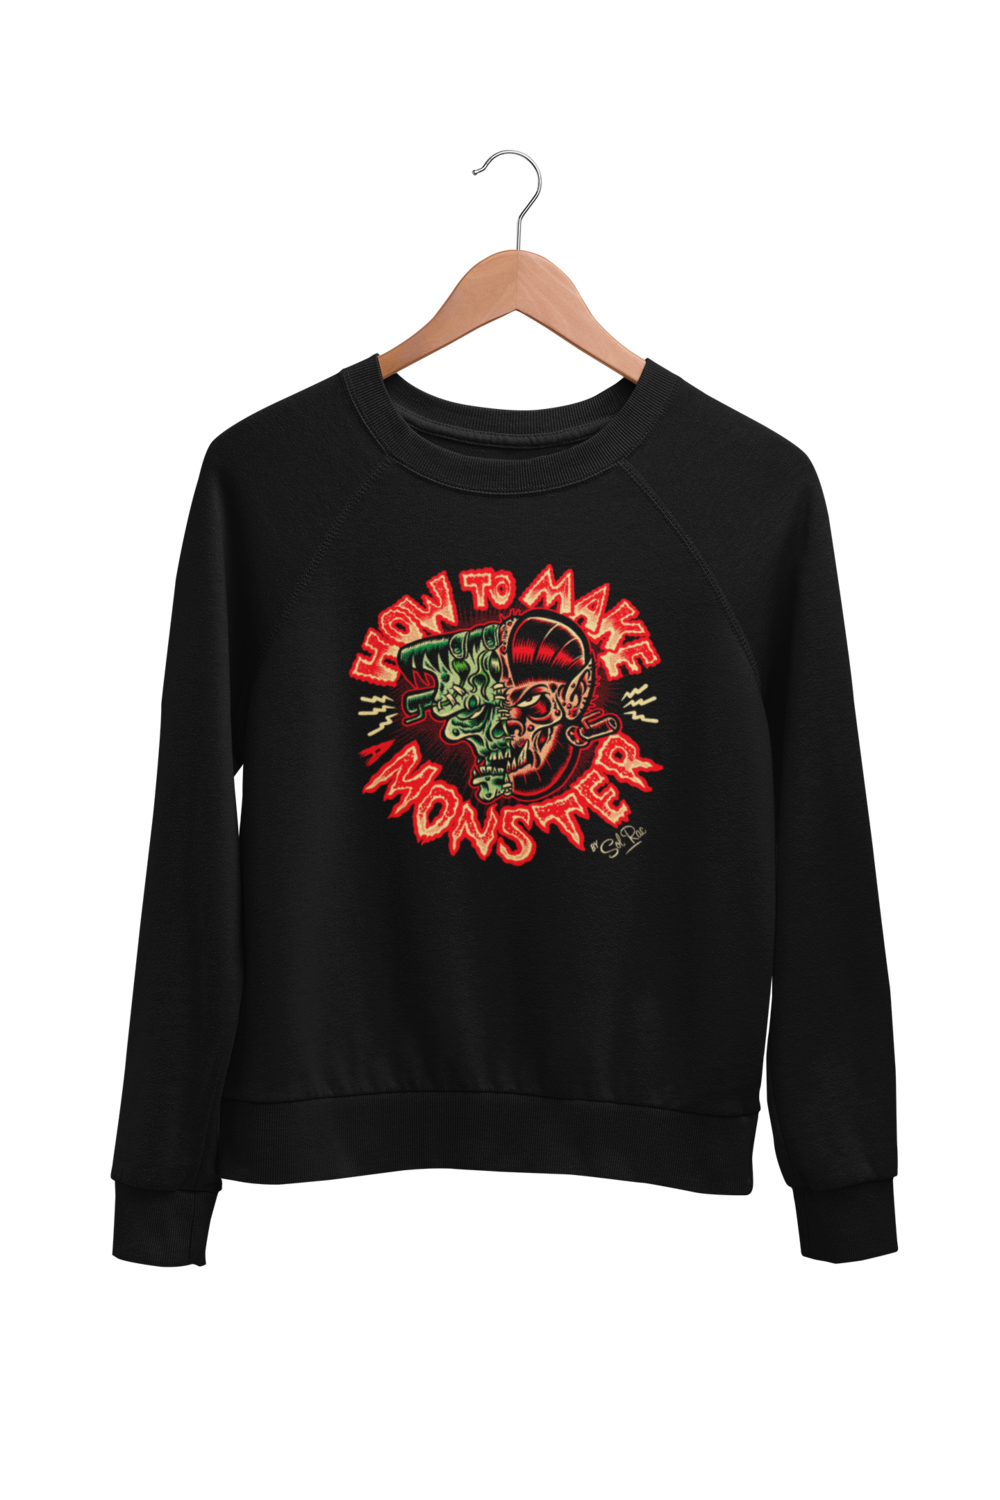 HOW TO MAKE A MONSTER SWEATSHIRT UNISEX by BY SOL RAC